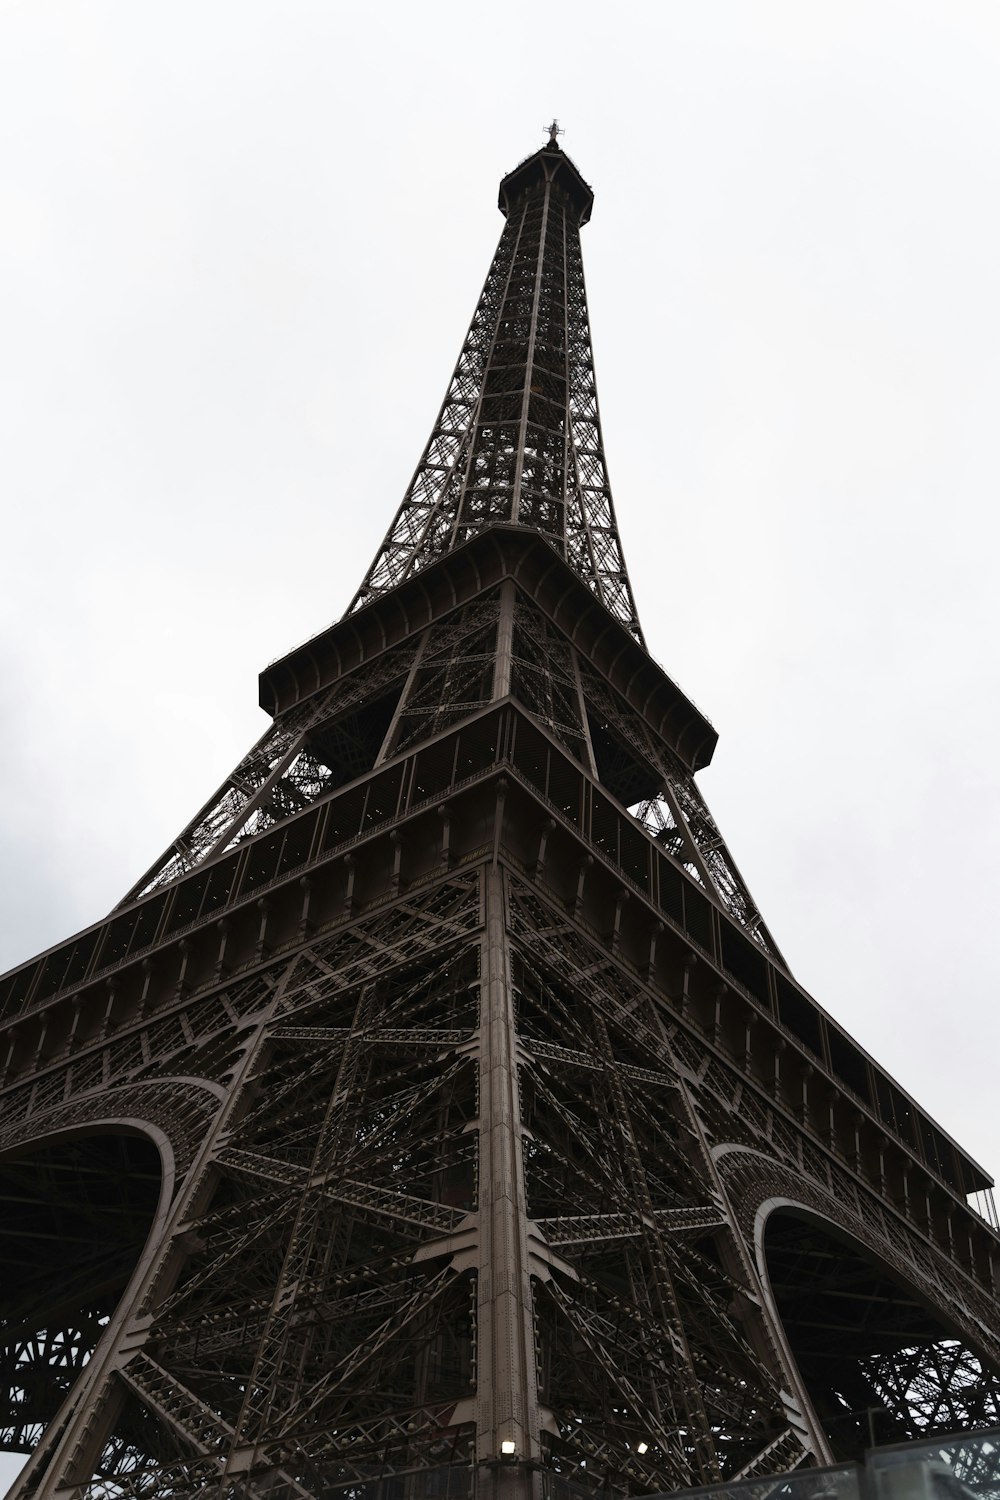 the top of the eiffel tower against a cloudy sky